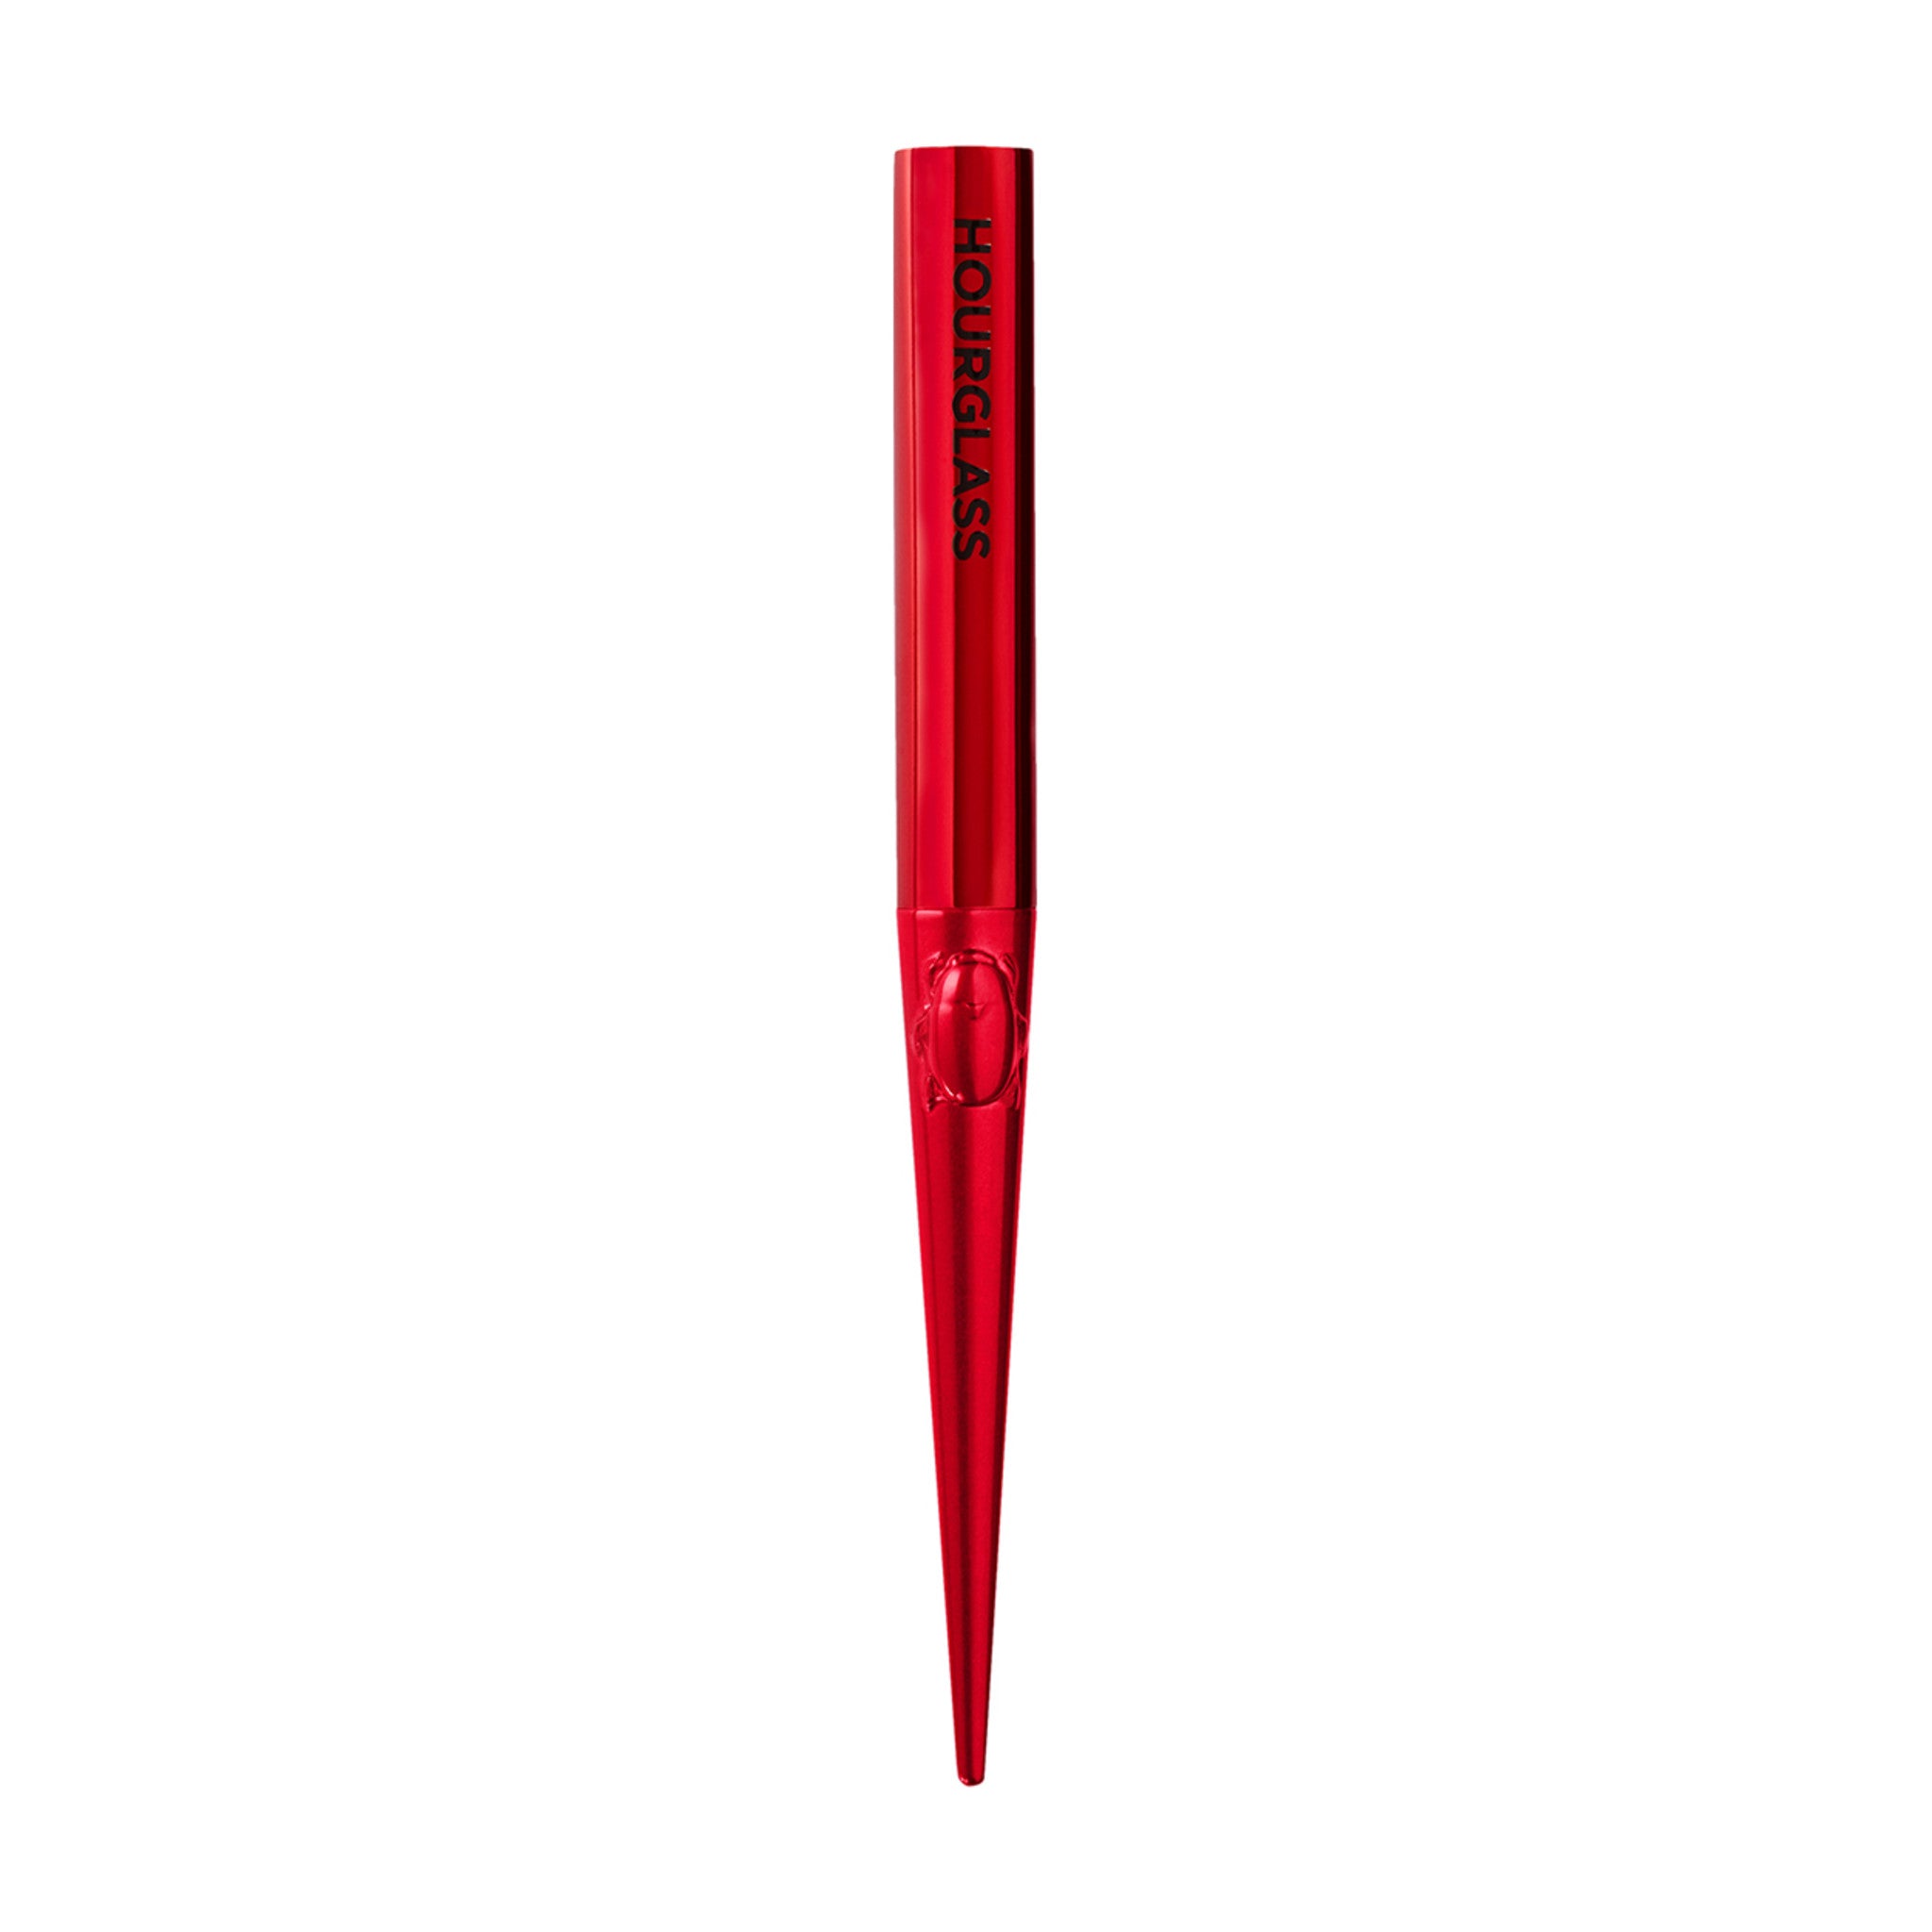 Hourglass Confession Slim High Intesity Refillable Lipstick Red 0 main image. This product is in the color red